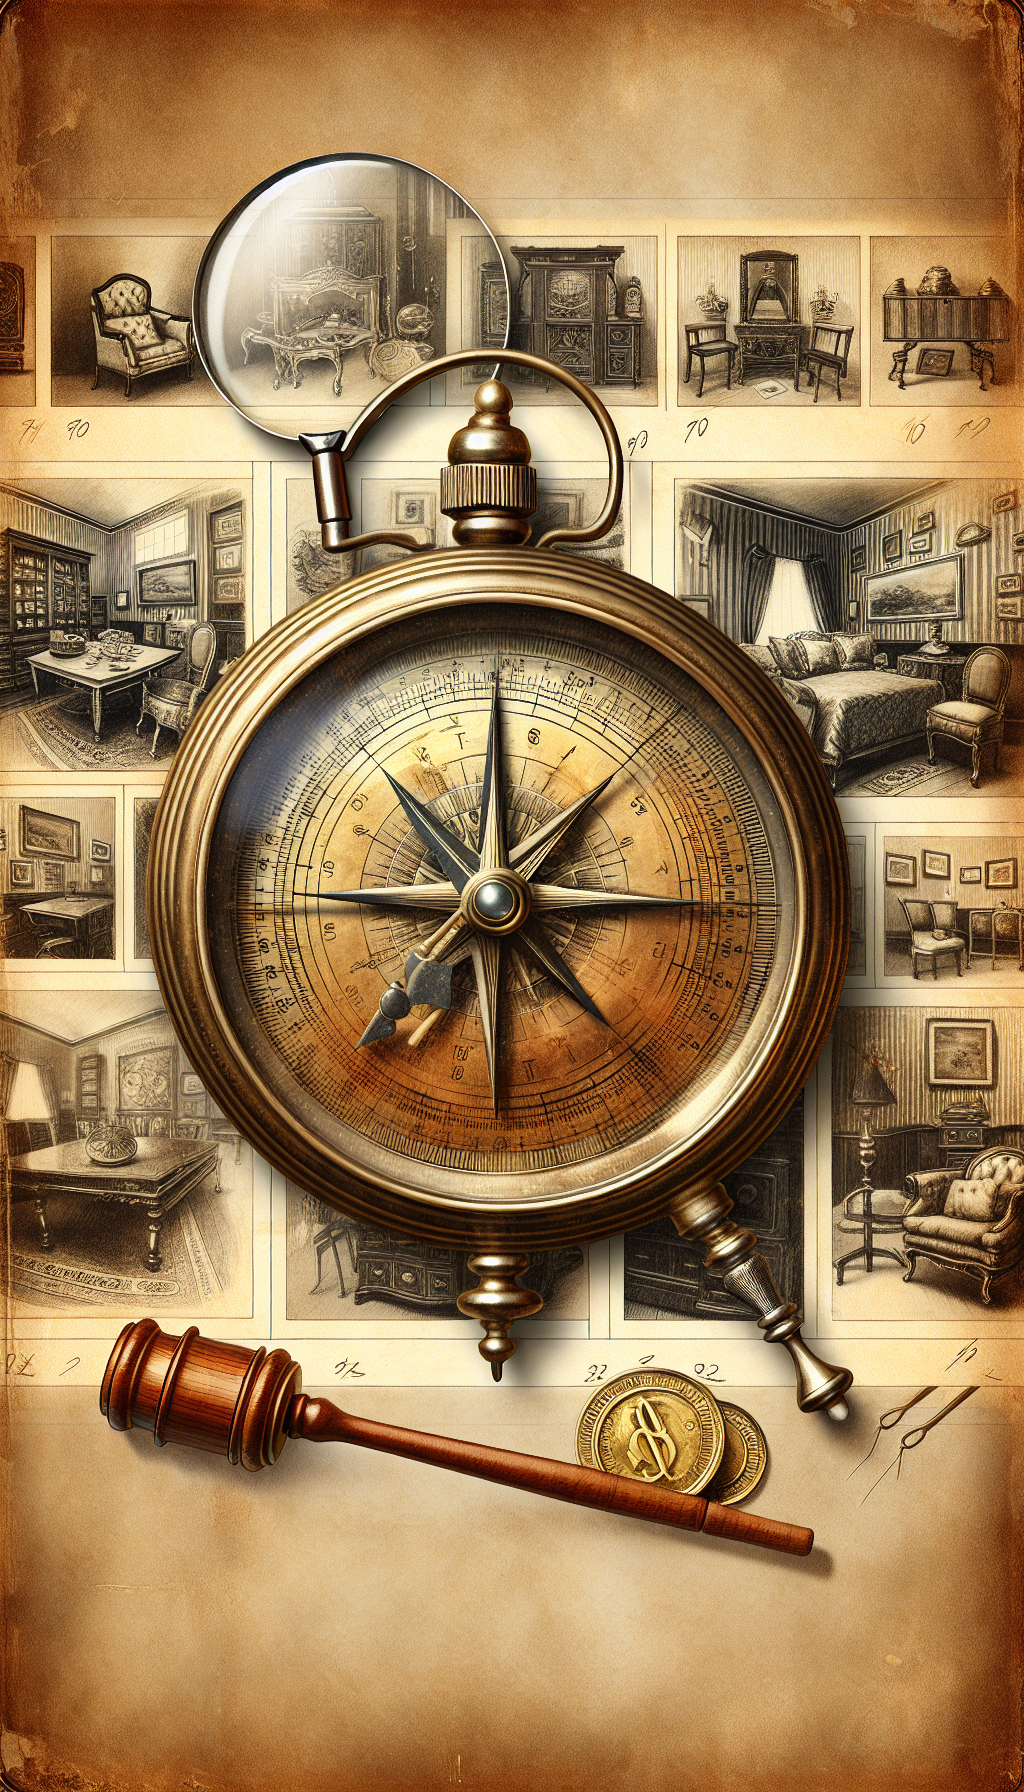 An antique compass layered over a collage of sepia-toned vintage interior photographs, with a magnifying glass highlighting the price tag on one image, and a gavel beside it to represent the auction process. The compass needle points towards a golden coin symbol to signify the value aspect. The styles vary from realistic renderings to pencil sketches, creating a diverse visual journey.